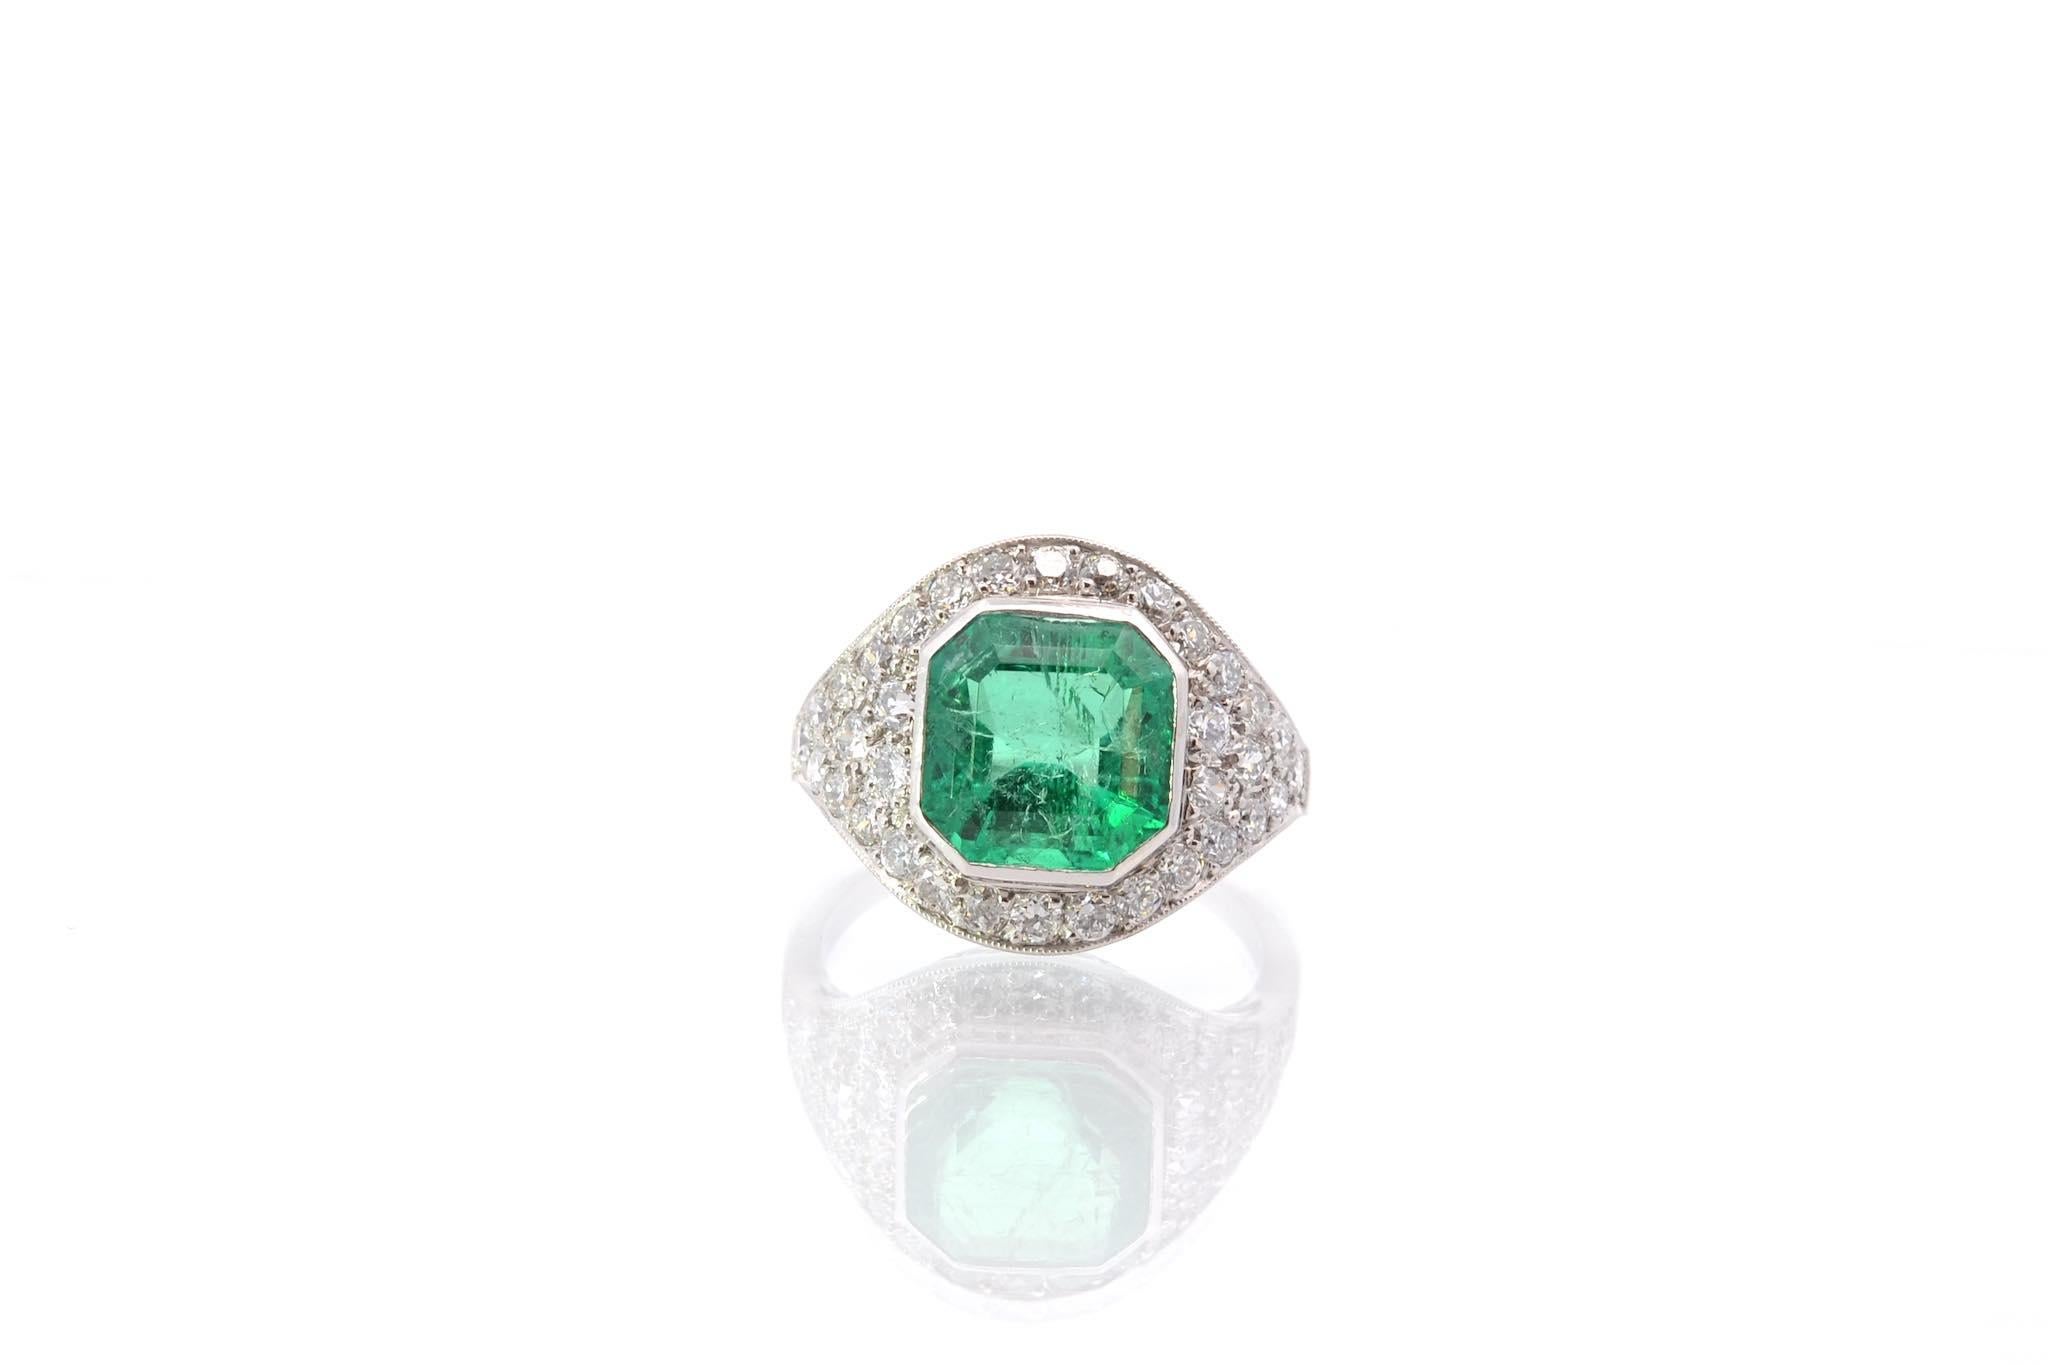 Stones: Emerald of 3.56 cts and 34 diamonds of 1.10 cts
Material: Platinum
Dimensions: 1.6cm
Weight: 6.6g
Period: Recent vintage style
Size: 54 (free sizing)
Certificate
Ref. : 25553 25102